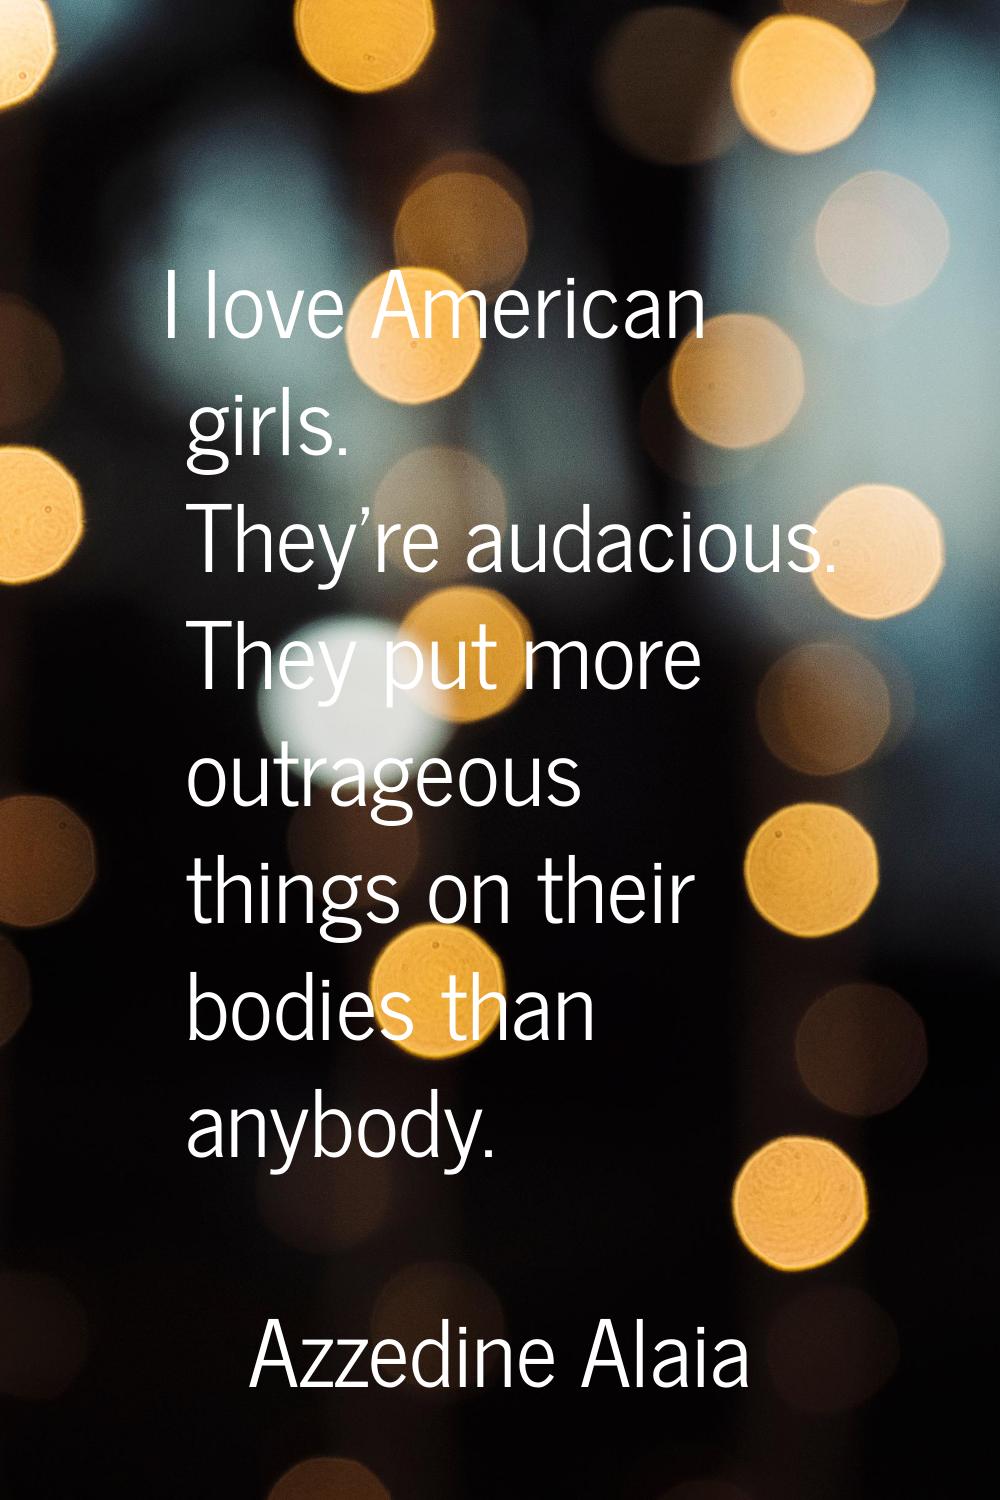 I love American girls. They're audacious. They put more outrageous things on their bodies than anyb